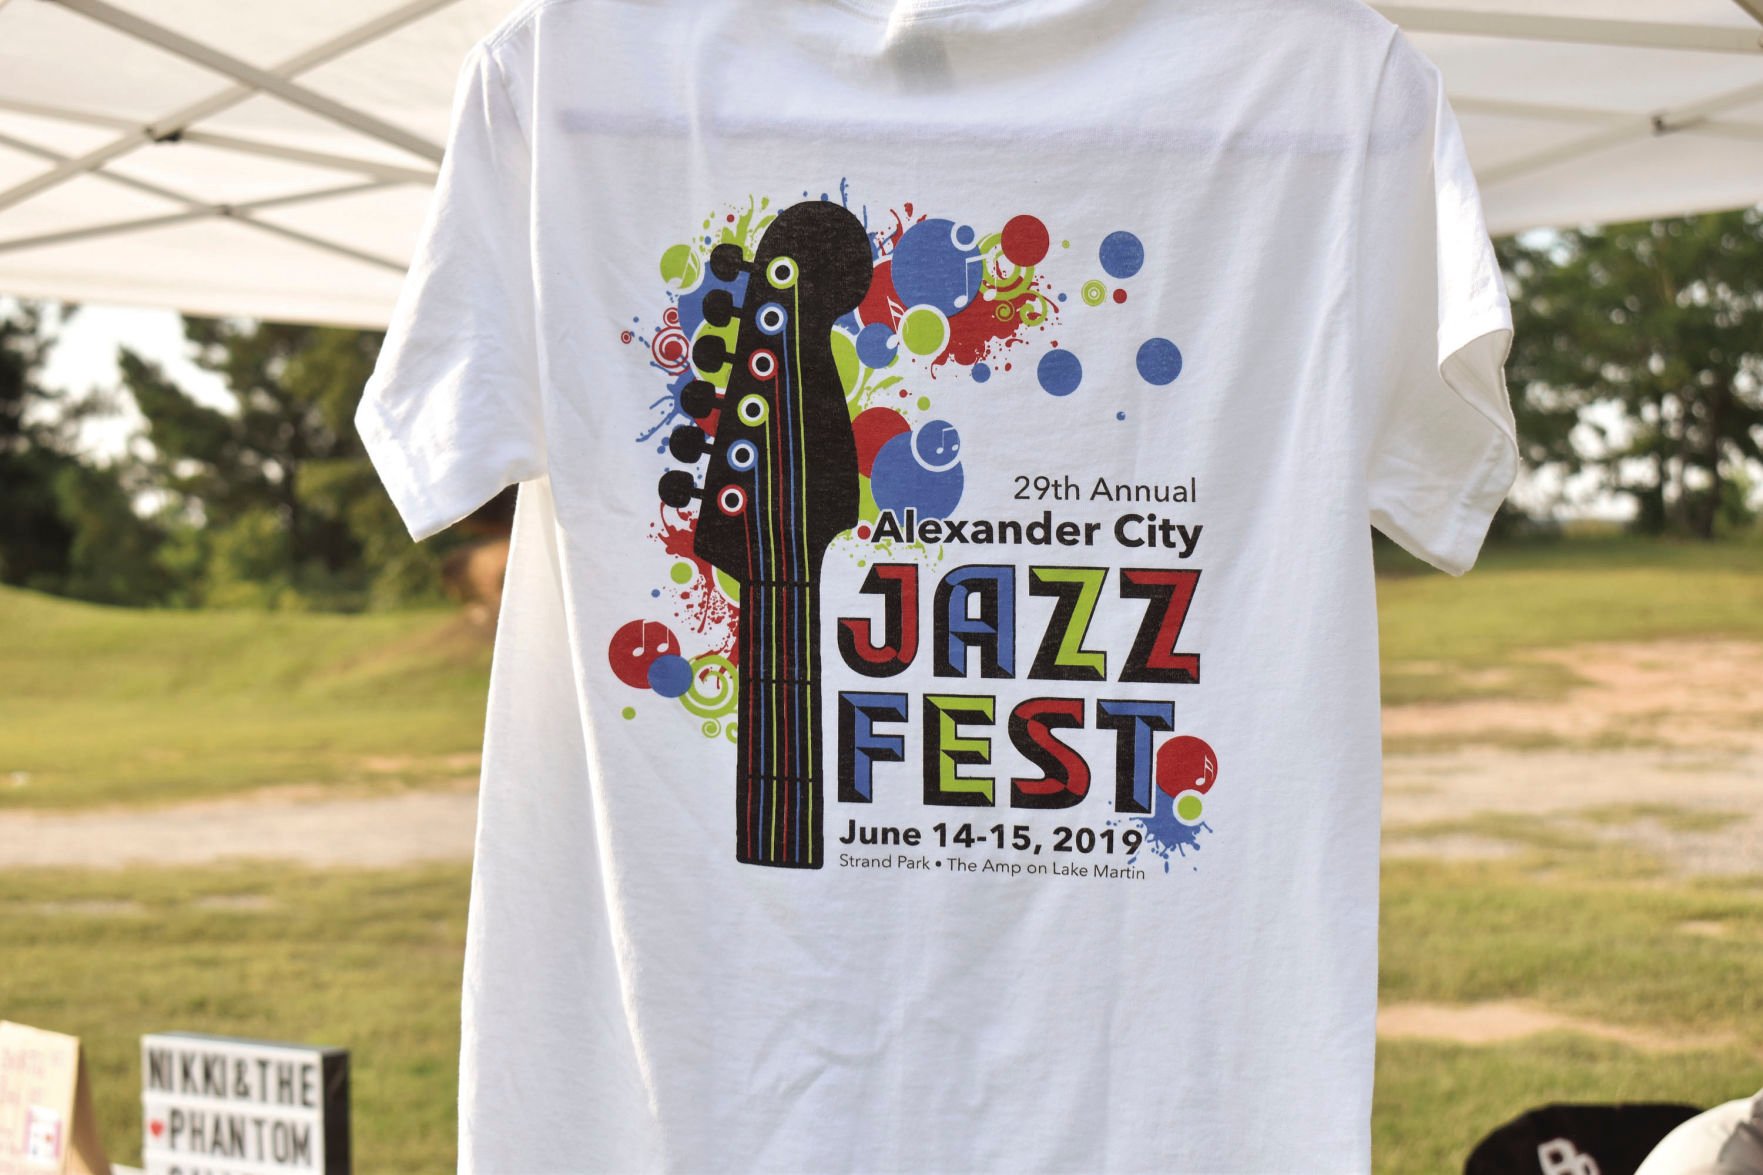 2019 Jazz Fest T Shirts Off 70 Free Shipping - free t shirt roblox 2019 off 70 free shipping